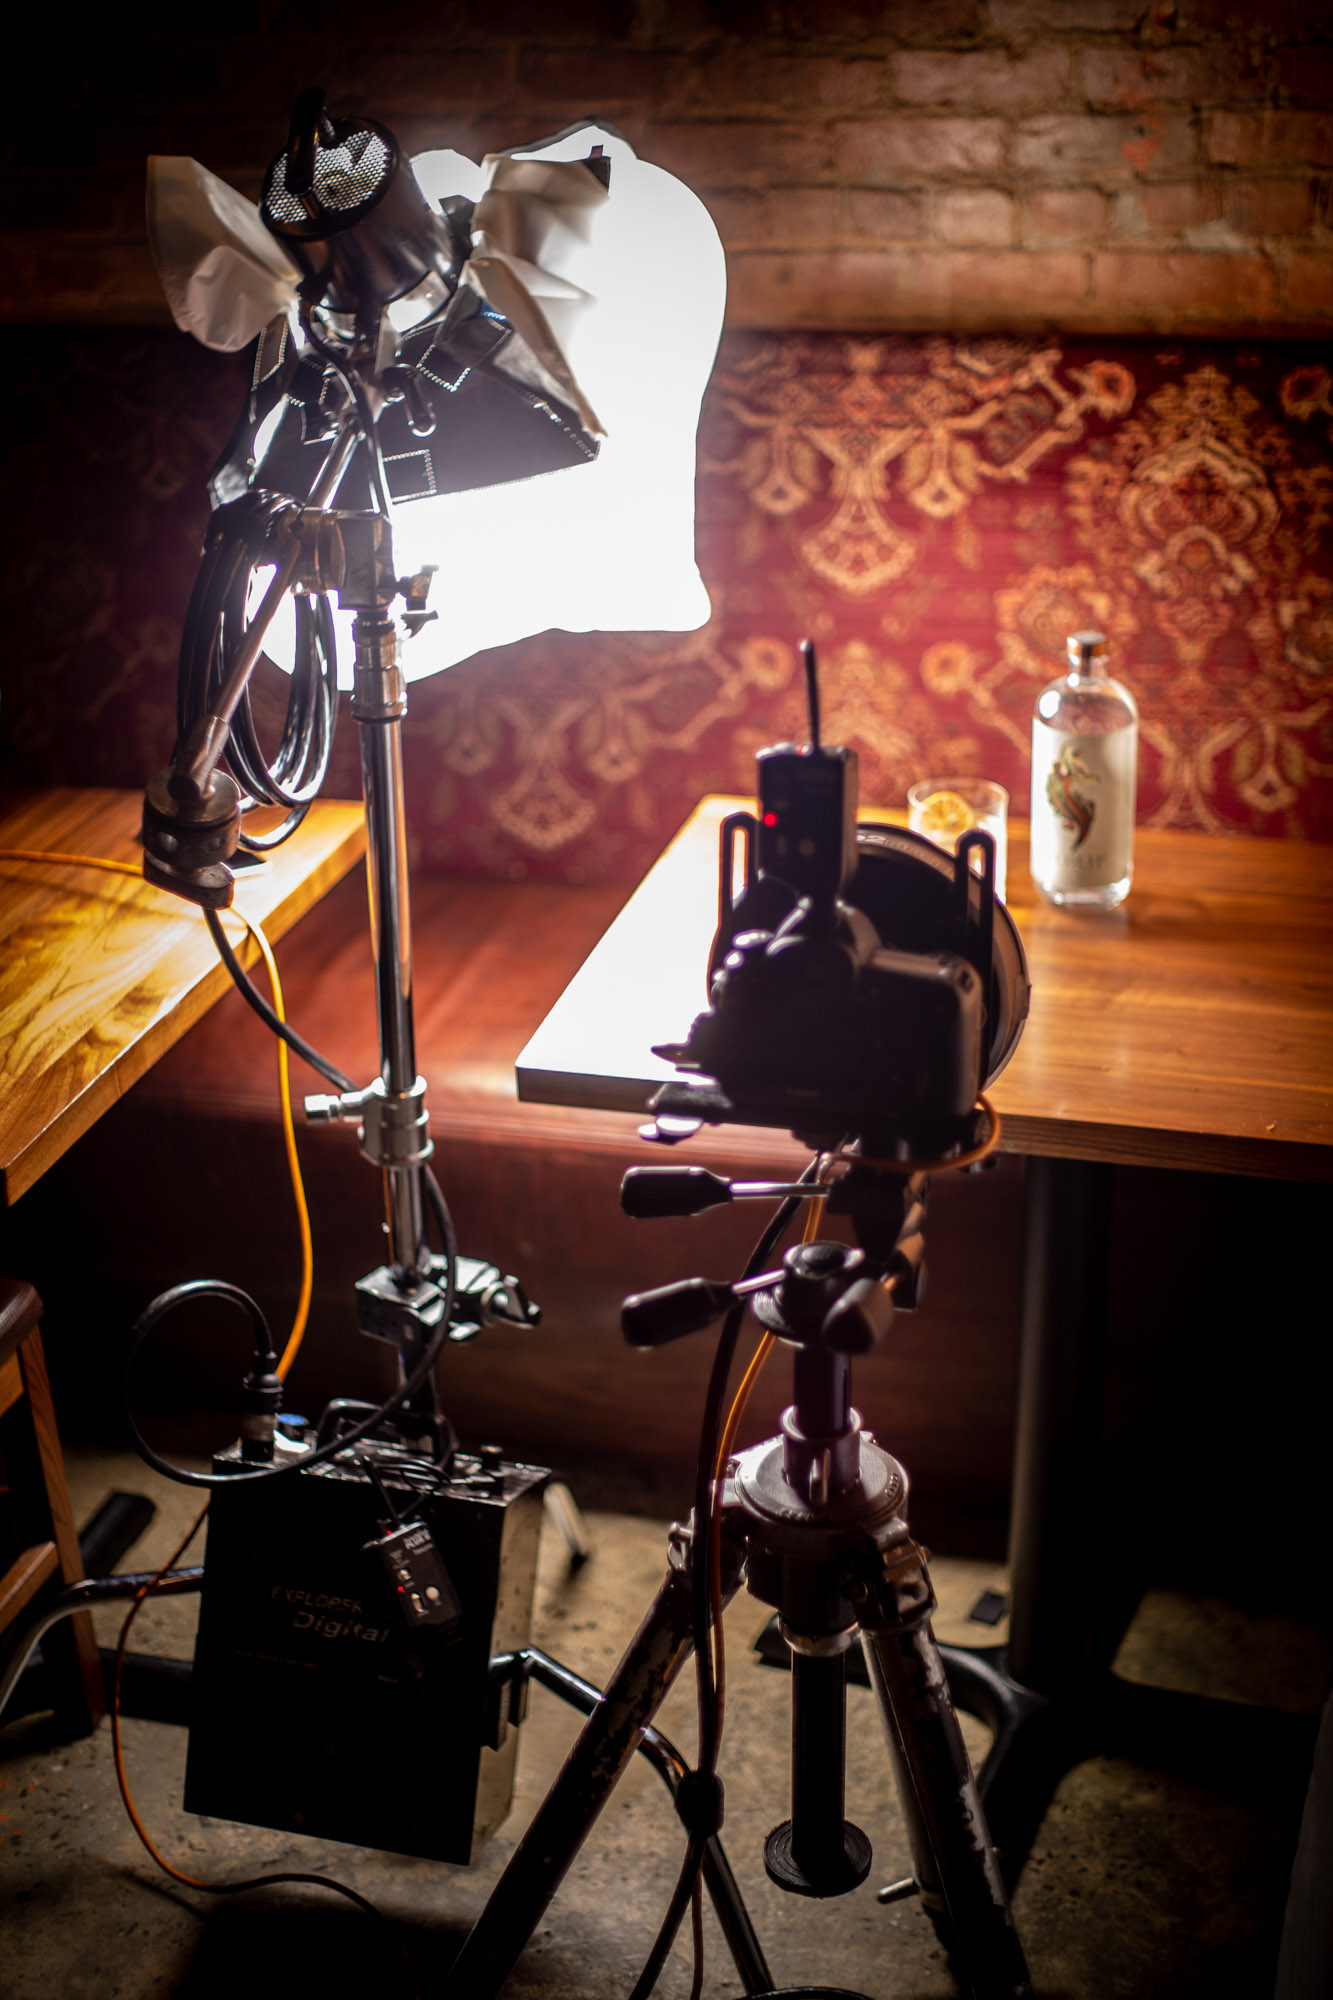 camera equipment being used to photograph a cocktail for seedlip